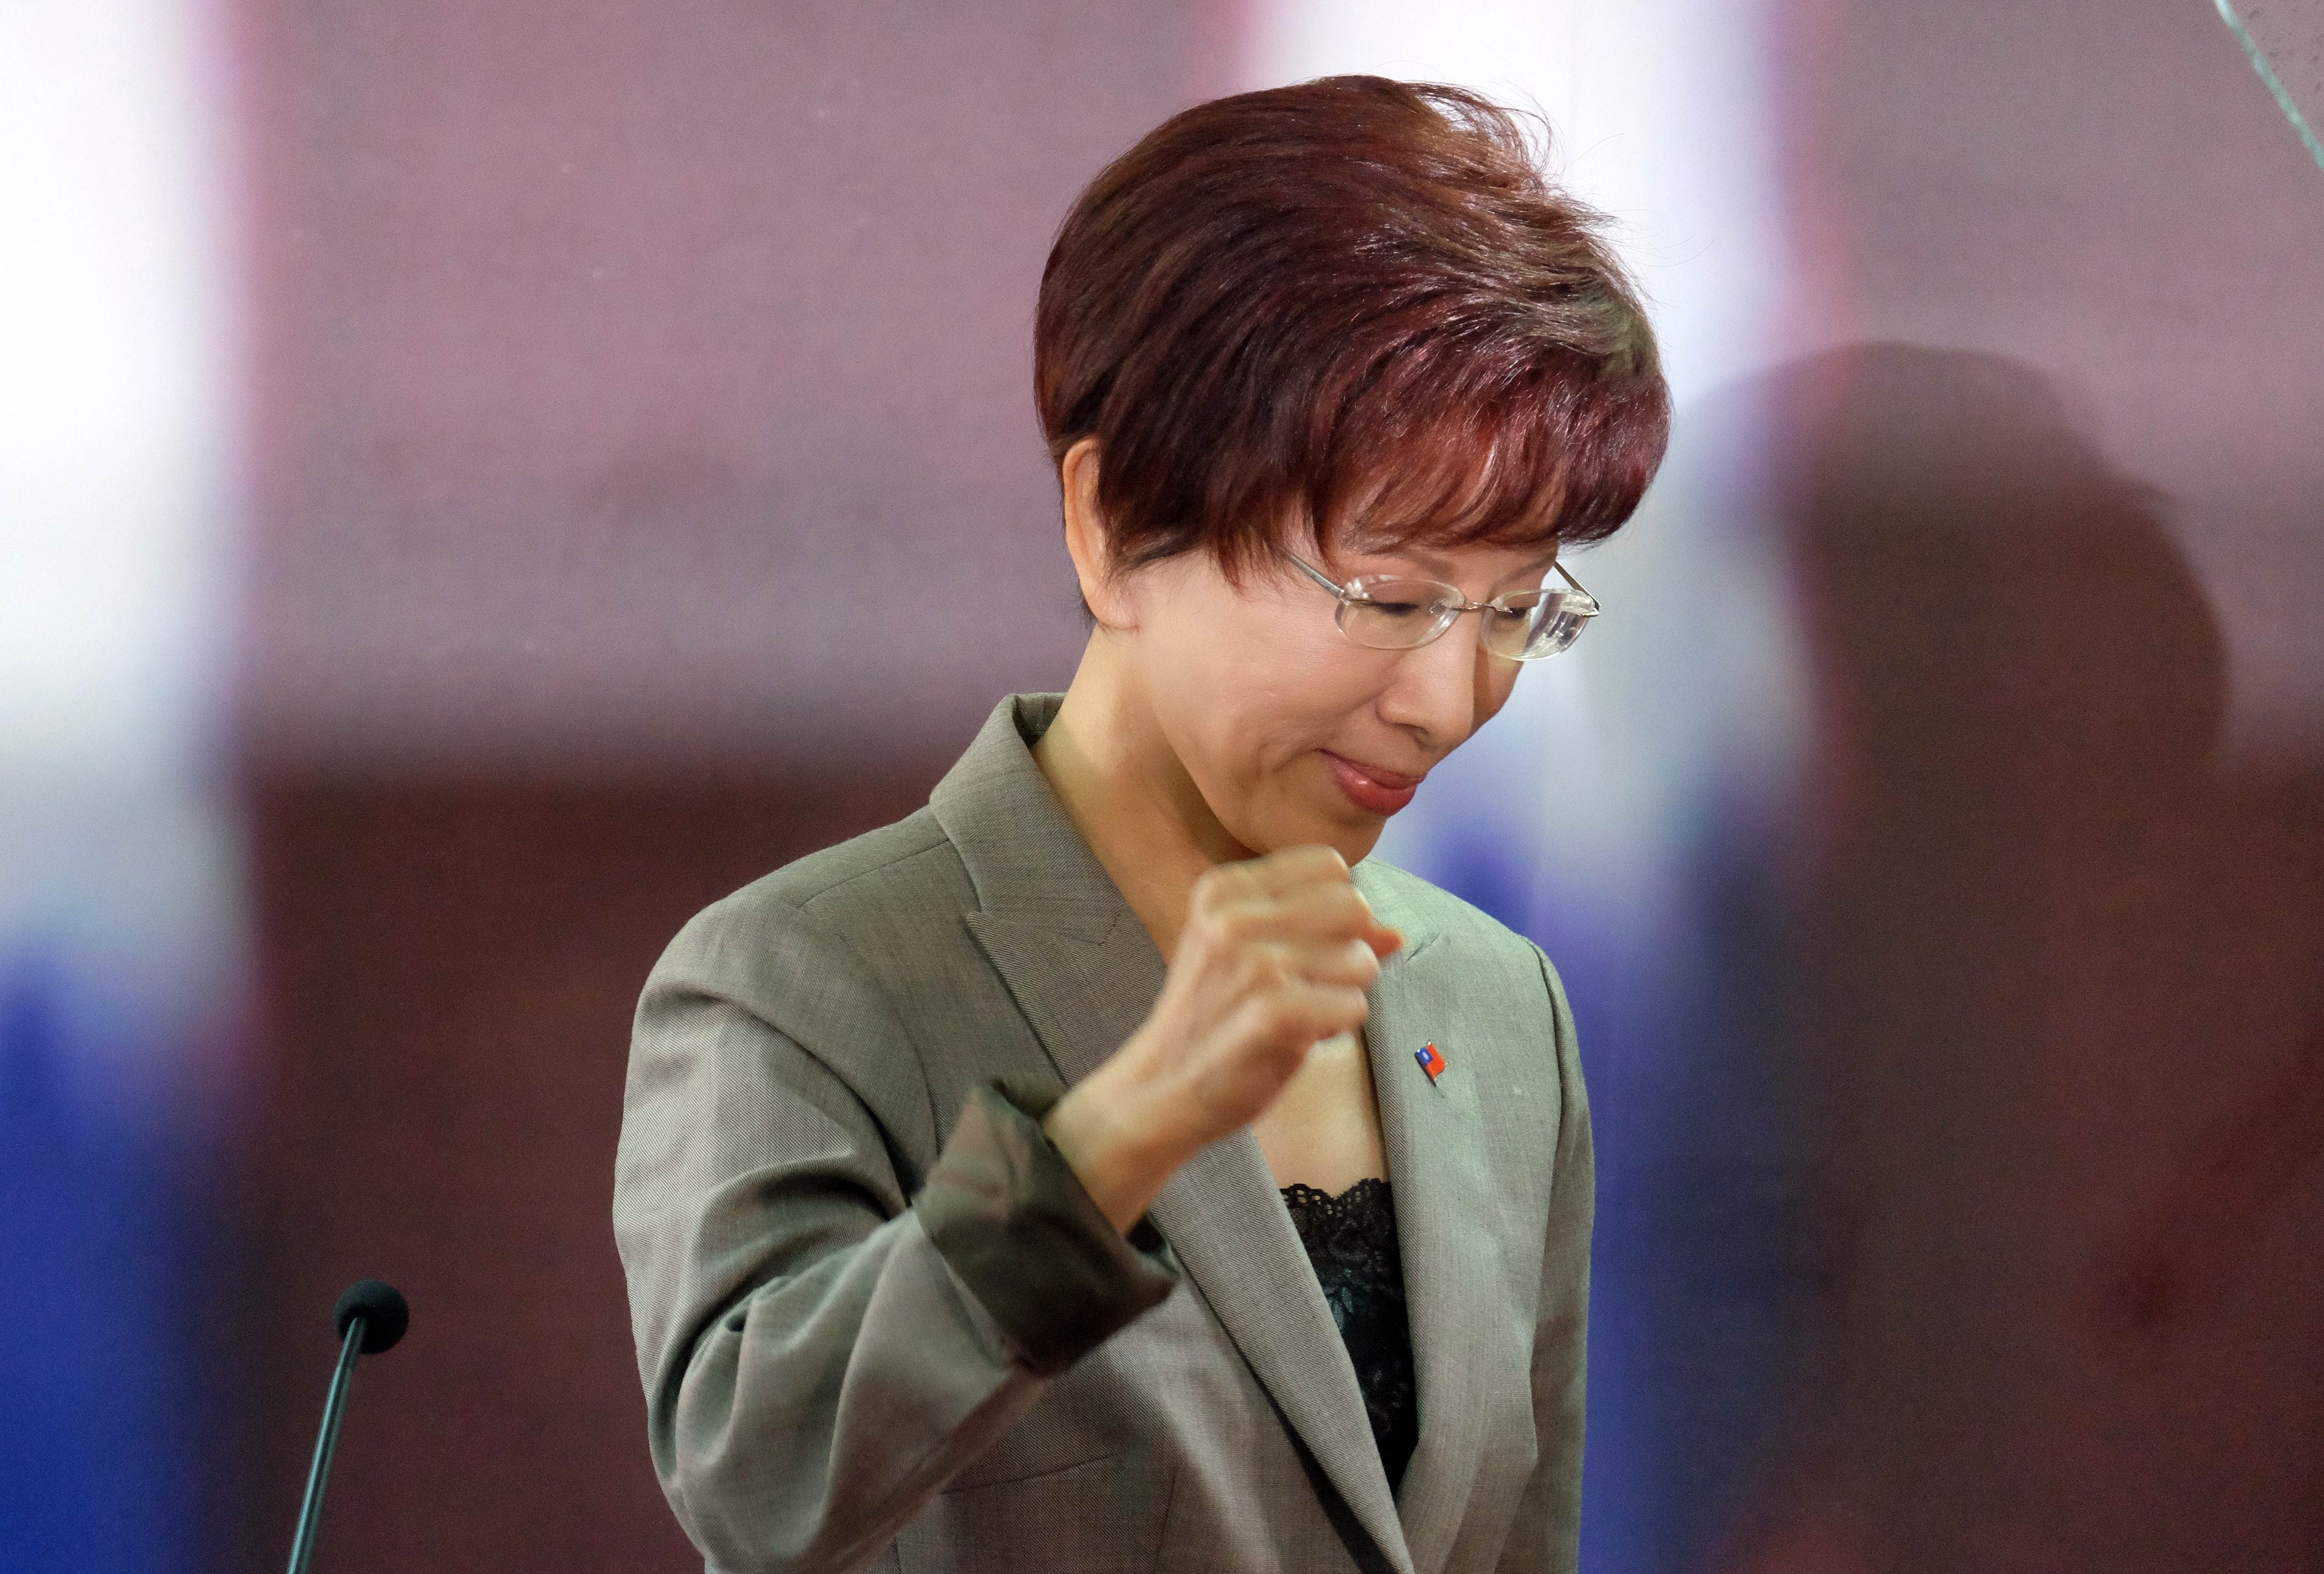 Hung Hsiu-chu has vowed to press on with her bid to become the next Taiwanese president despite her low poll ratings. Photo: AFP